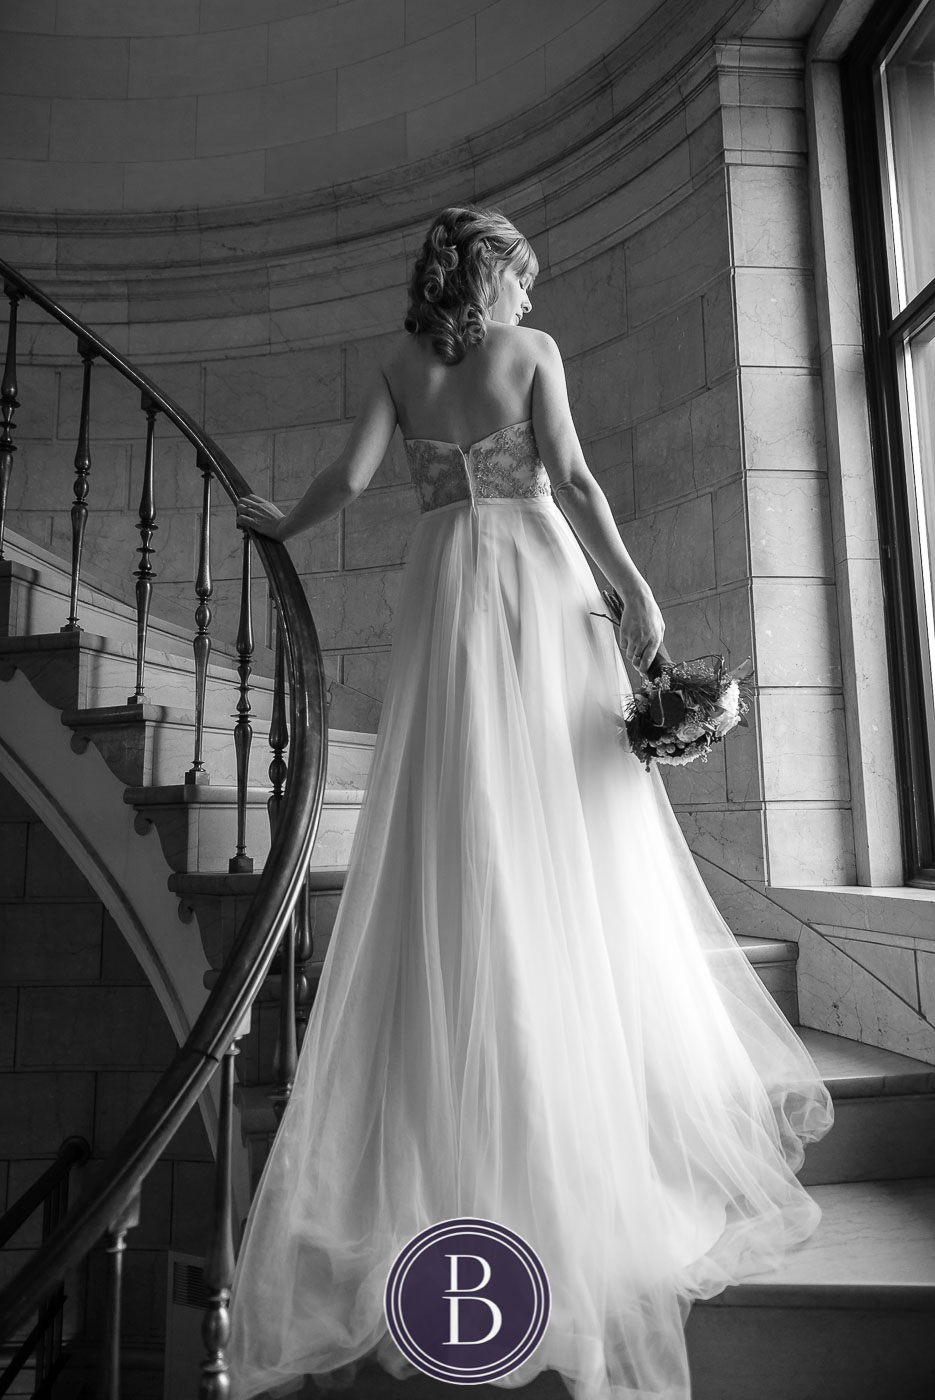 Bridal portrait on the staircase